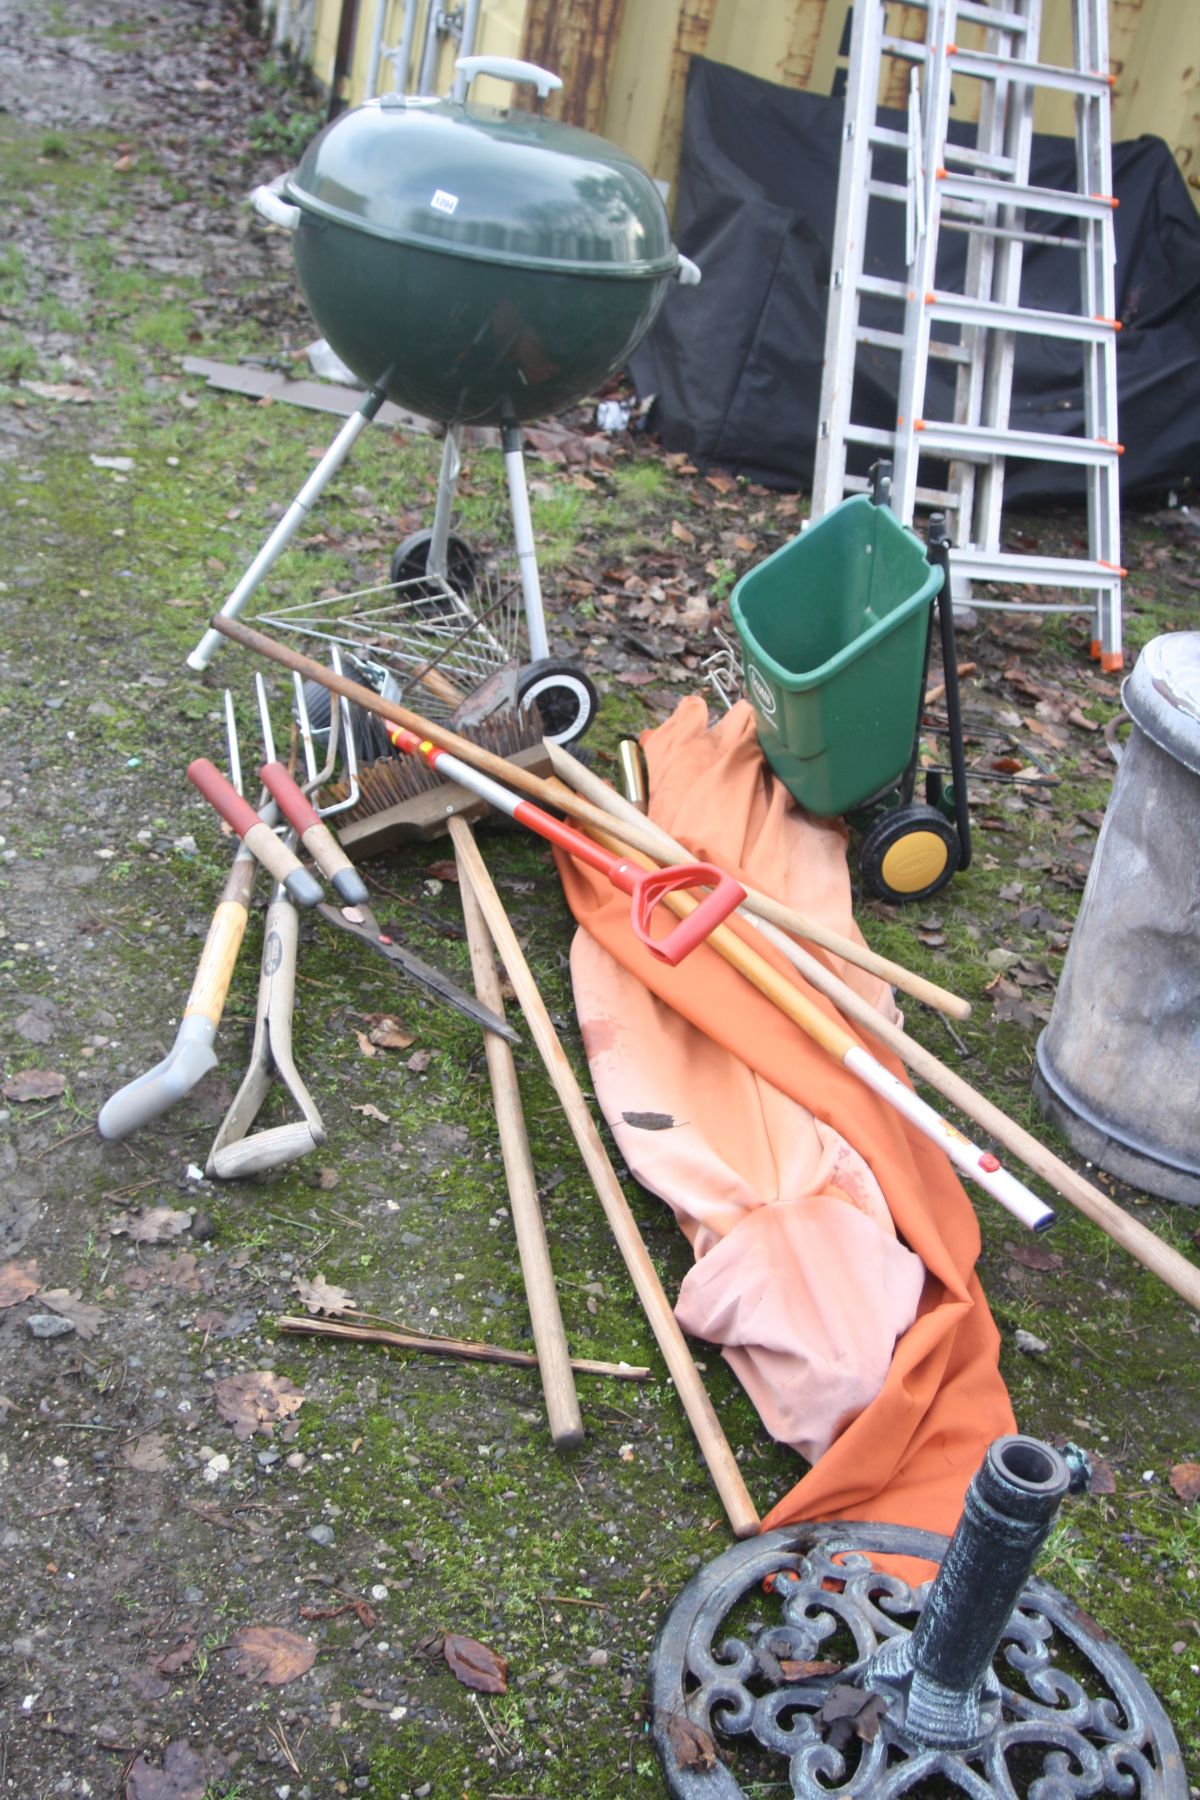 A WEBER BARBECUE, a parasol and stand along with various garden tools